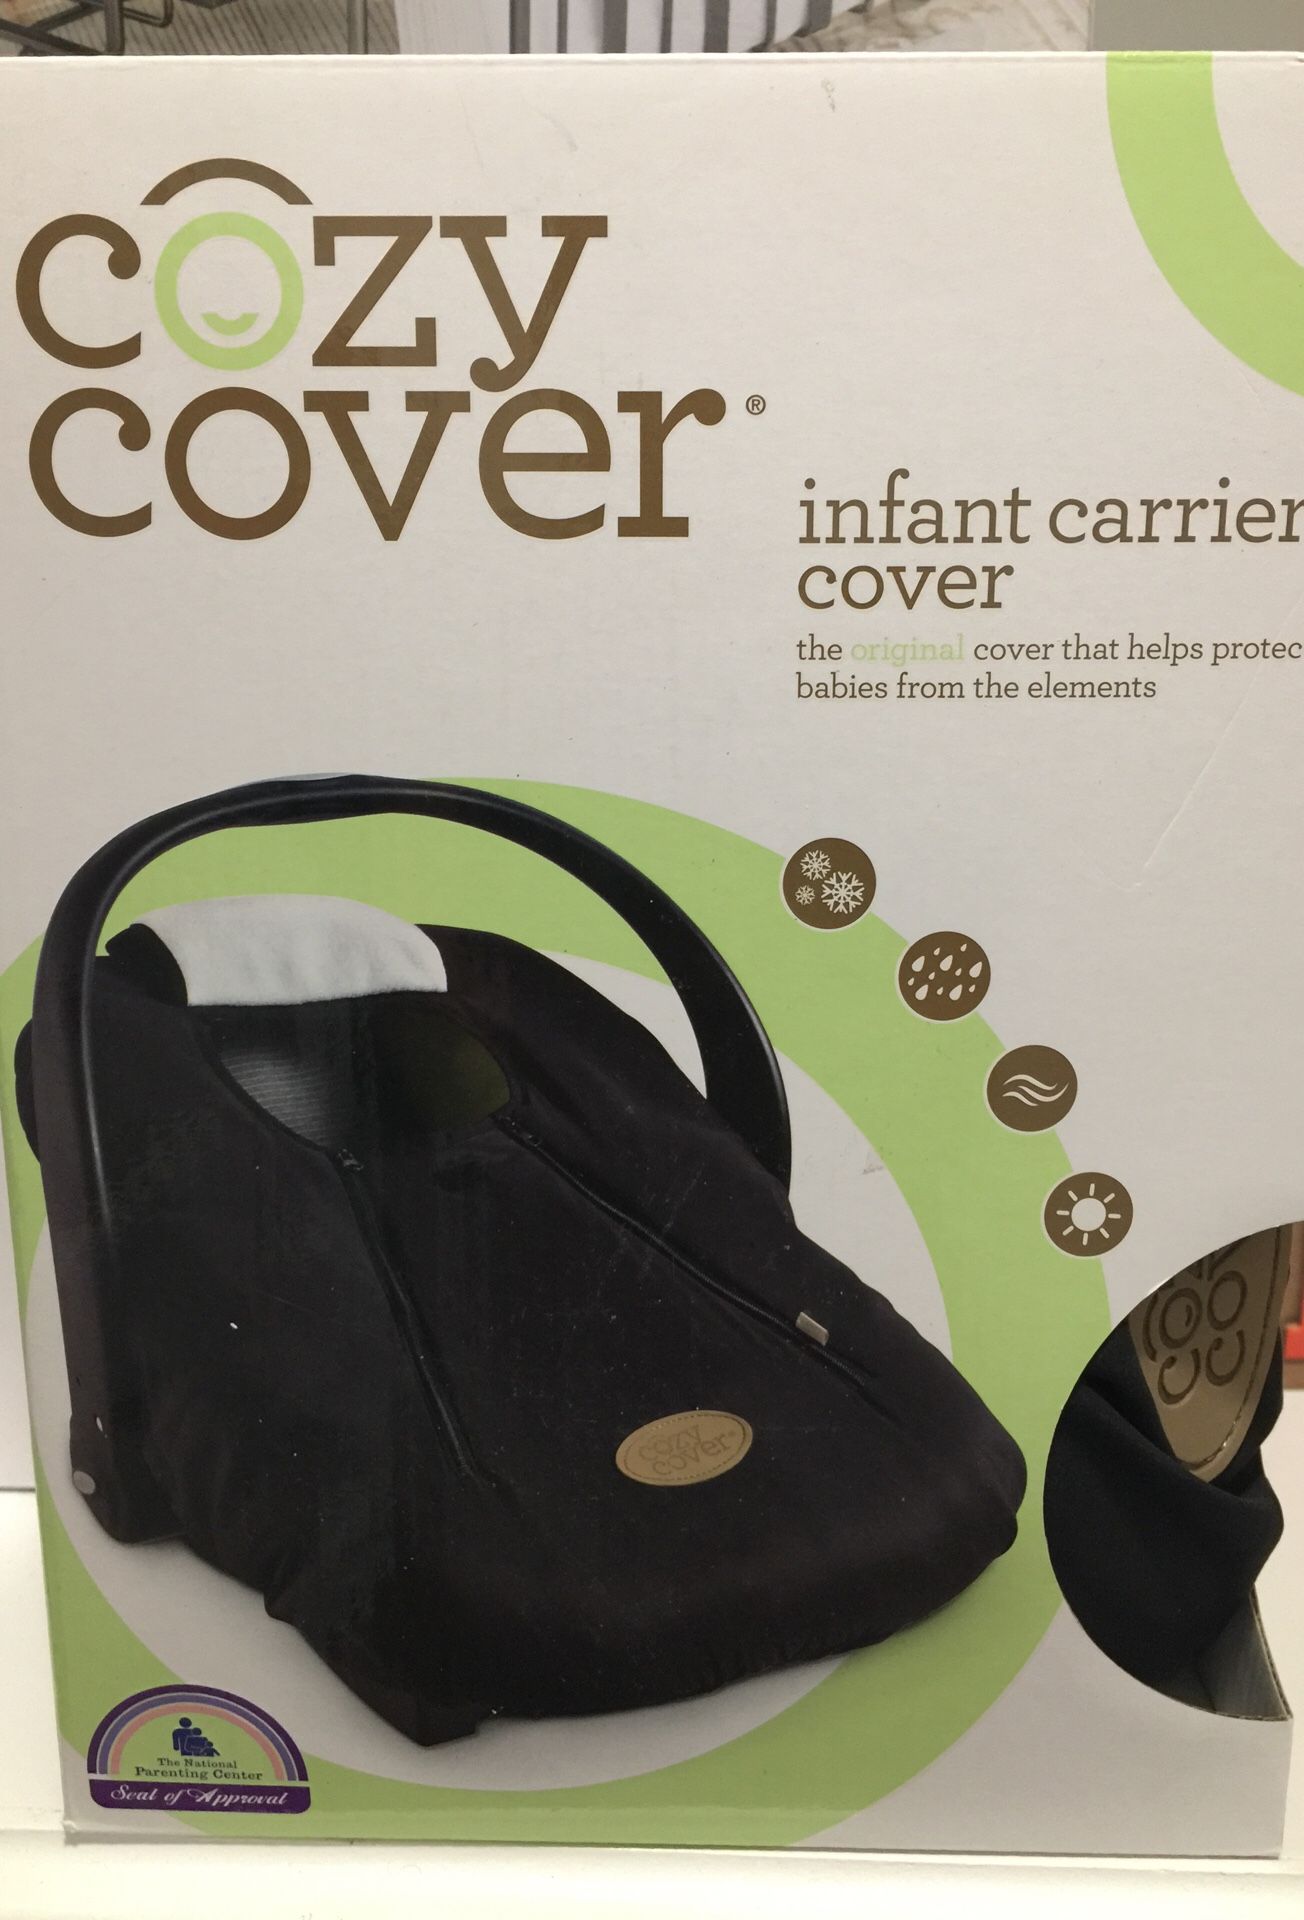 Cover for car seat